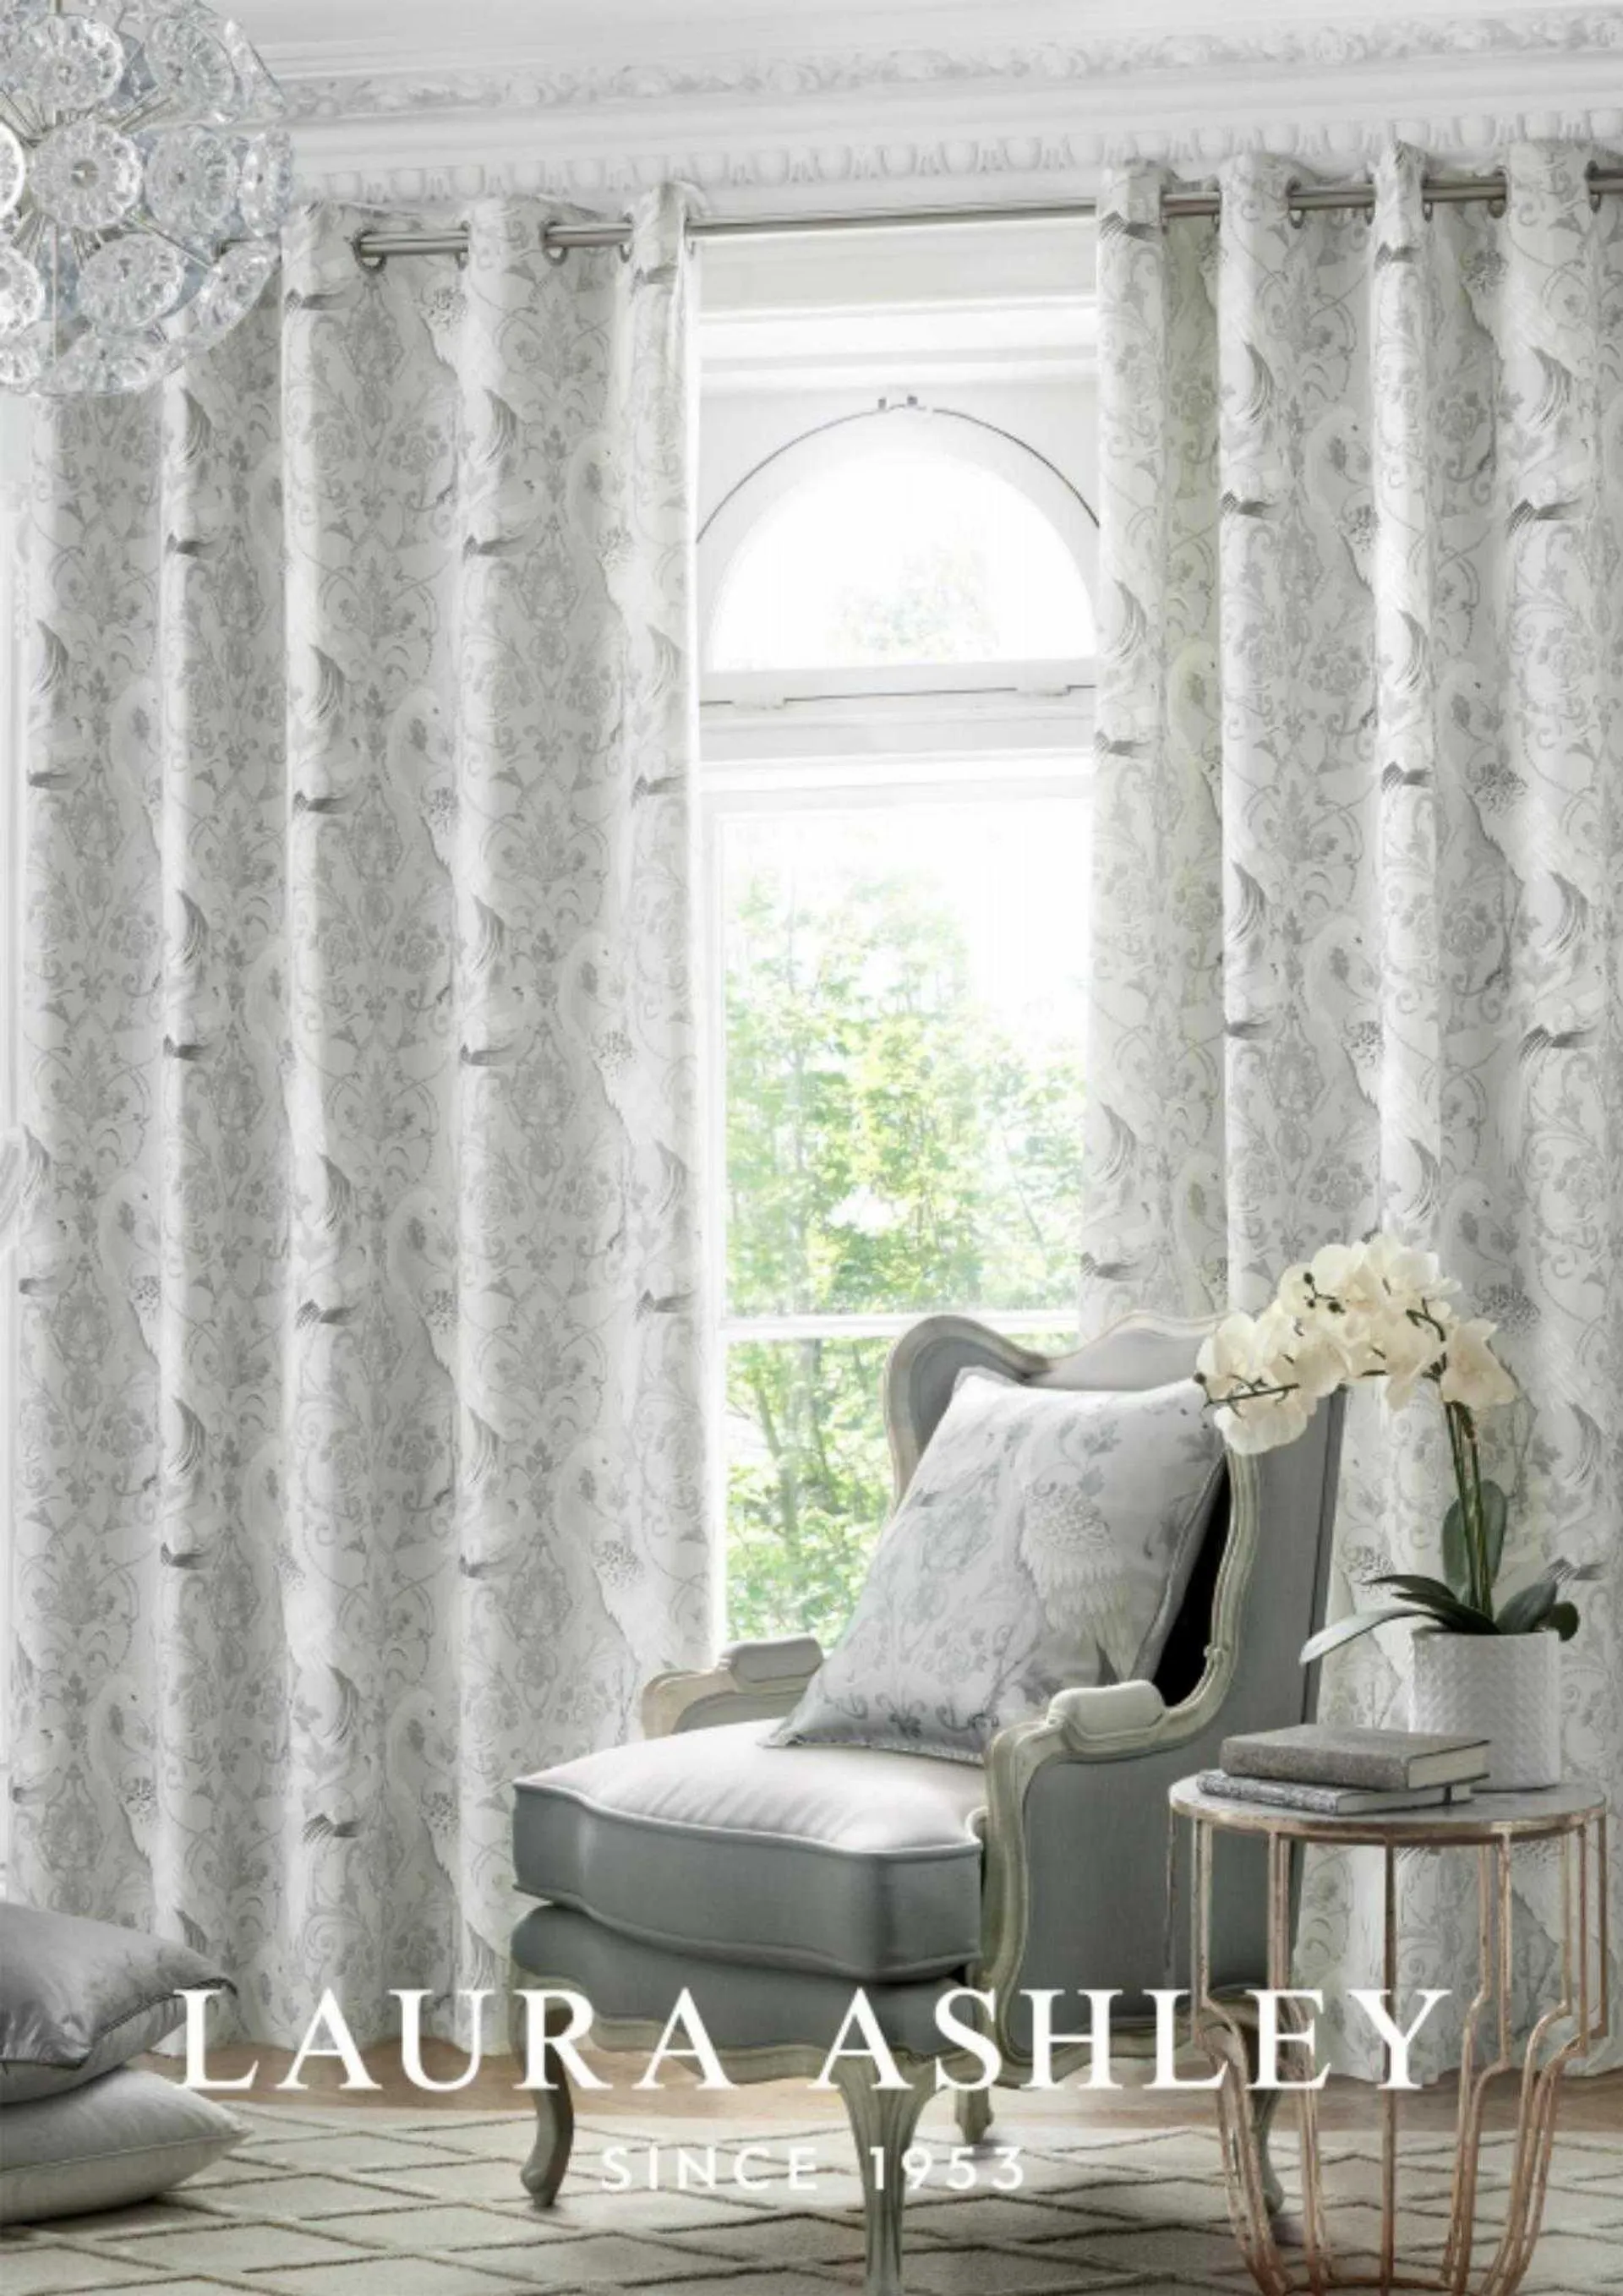 Laura Ashley Weekly Offers - 30